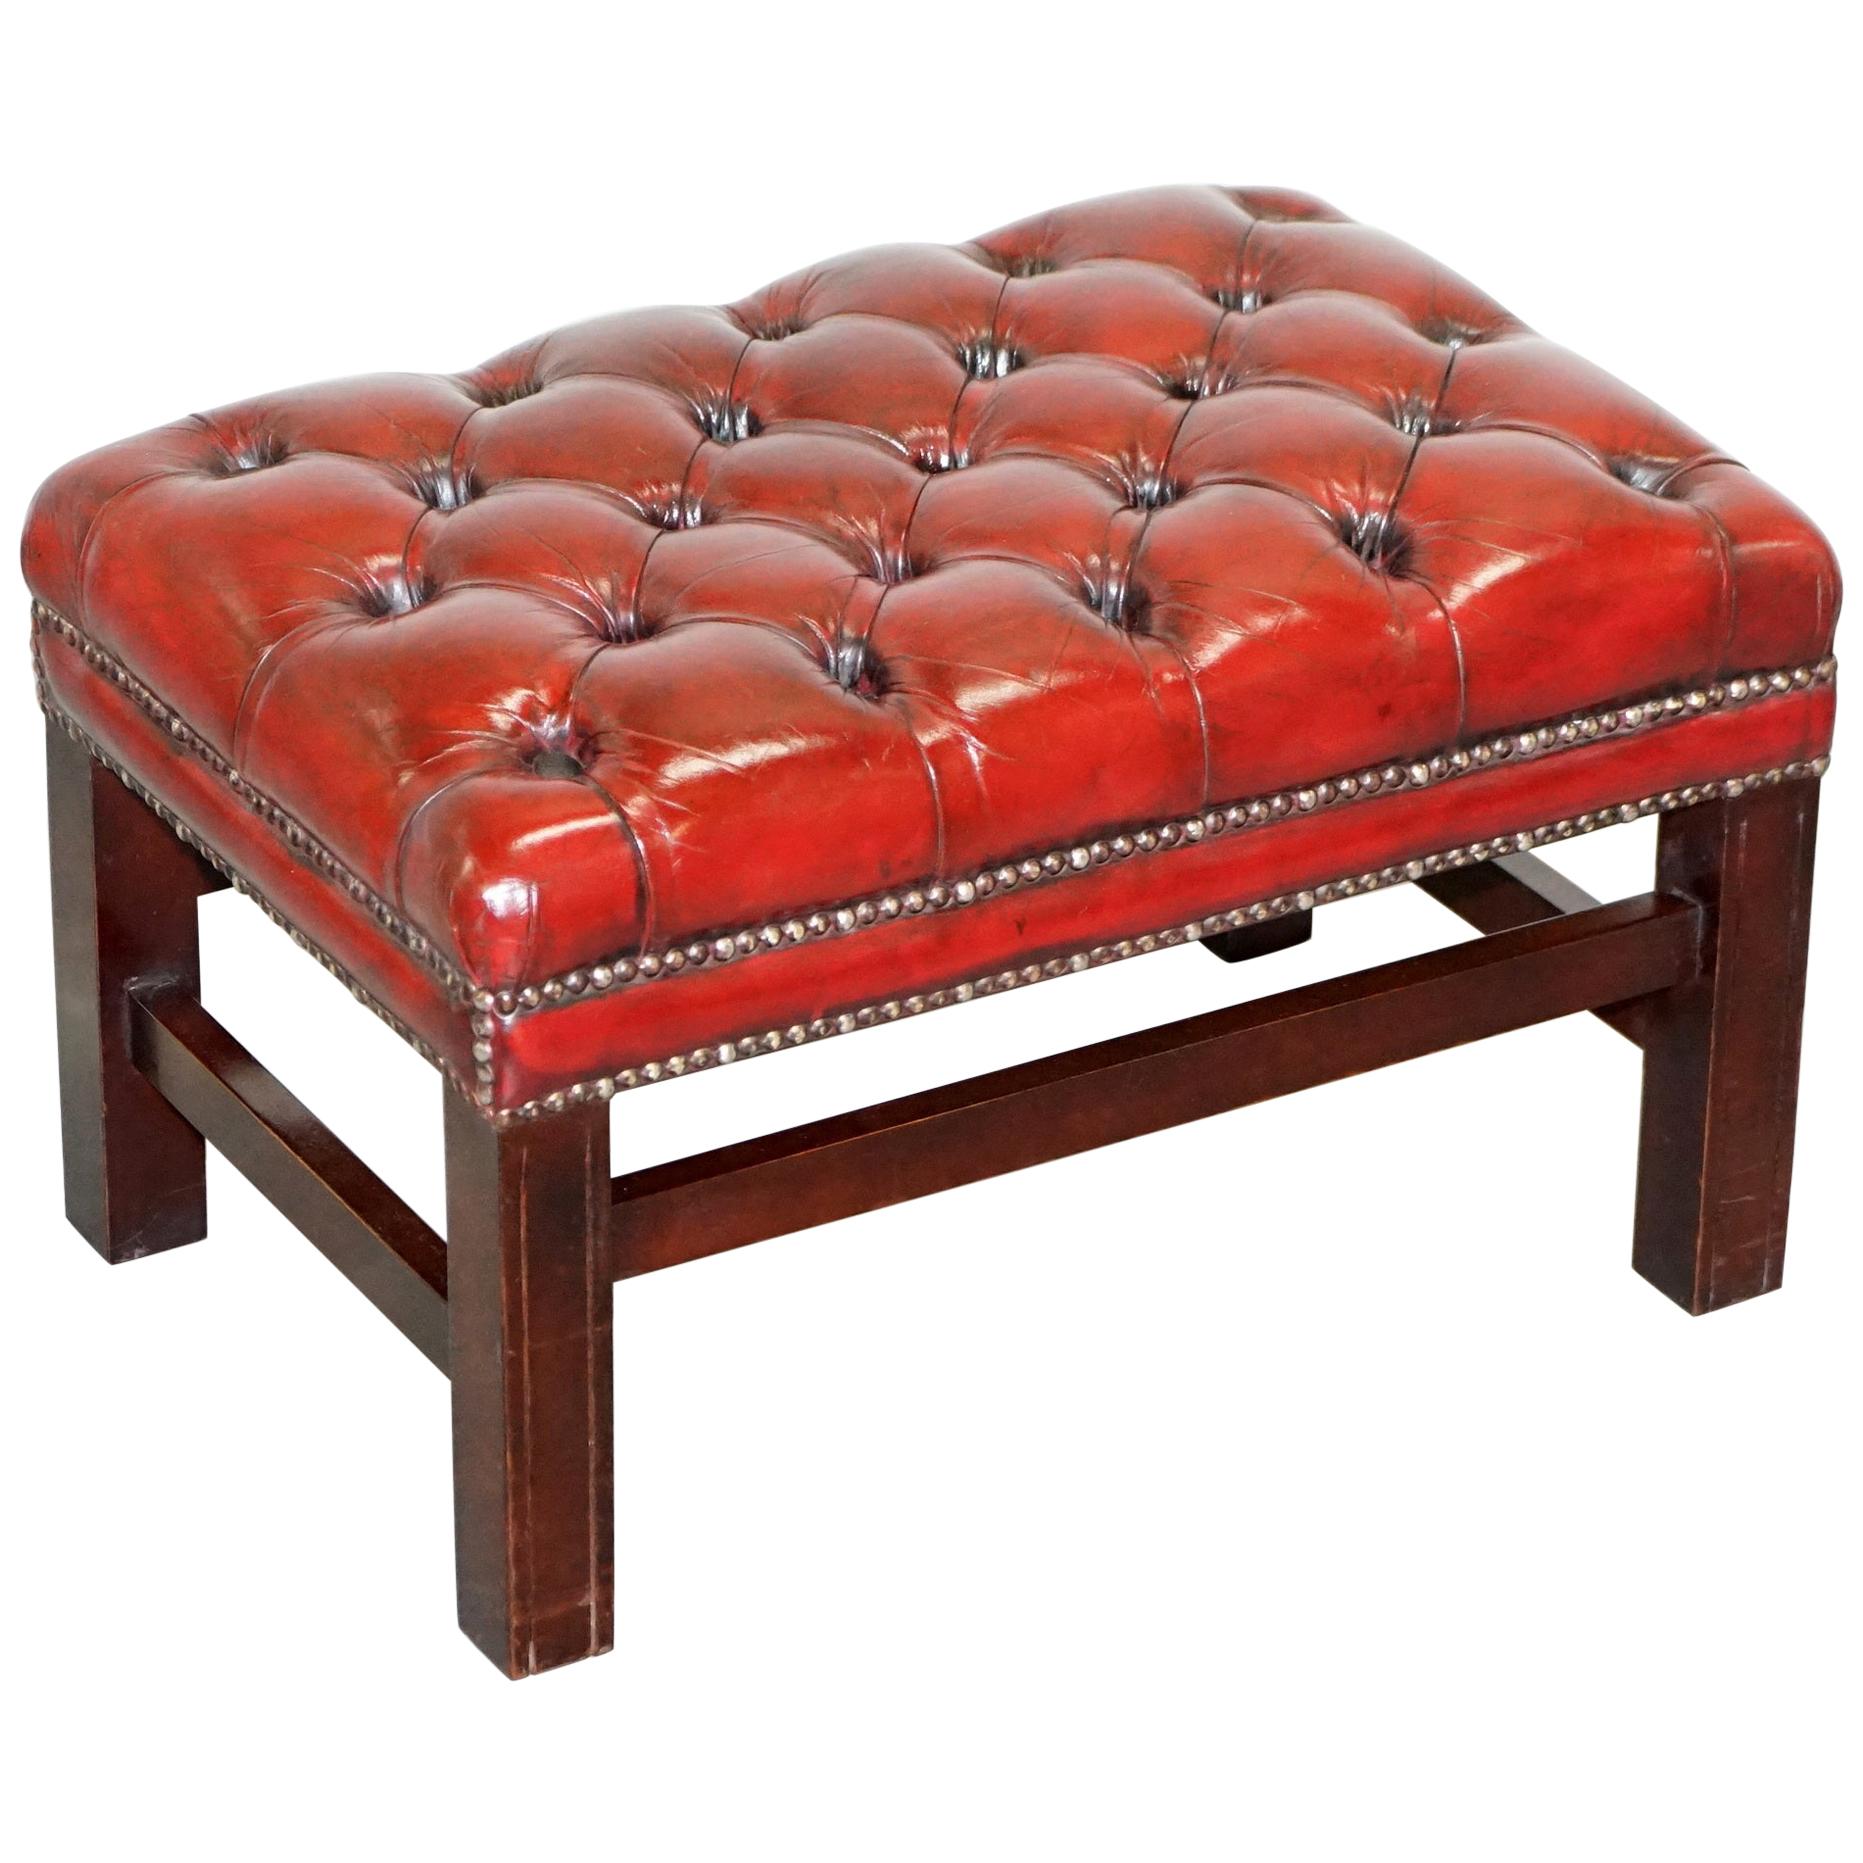 Fully Restored Vintage Chesterfield Bordeaux Leather Hand Dyed Footstool Bench